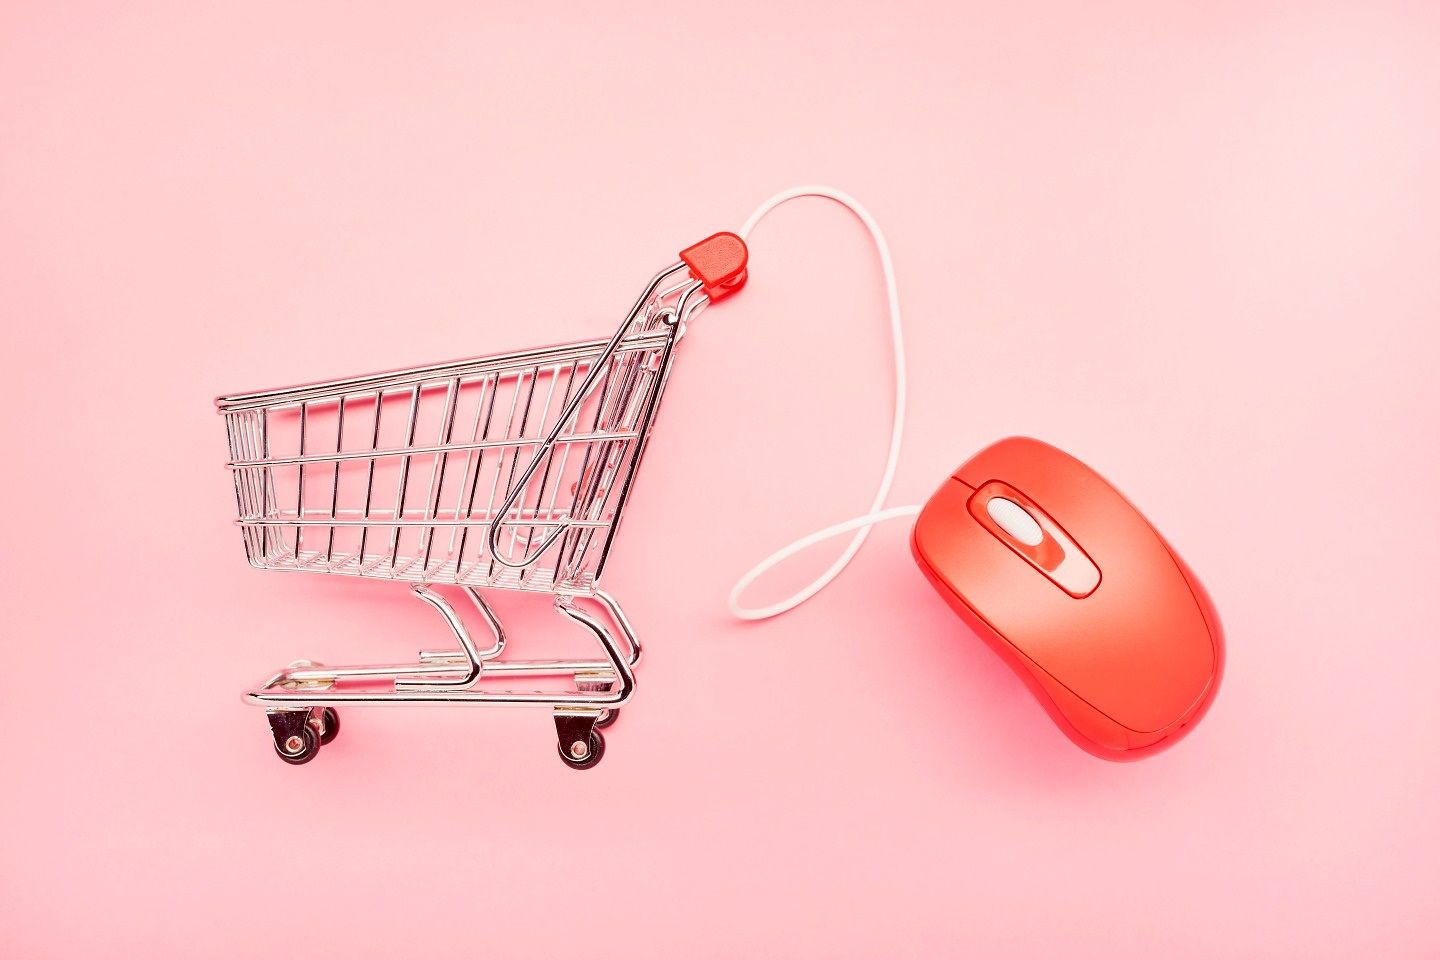 Still life of a small shopping cart and red computer mouse on pink background.